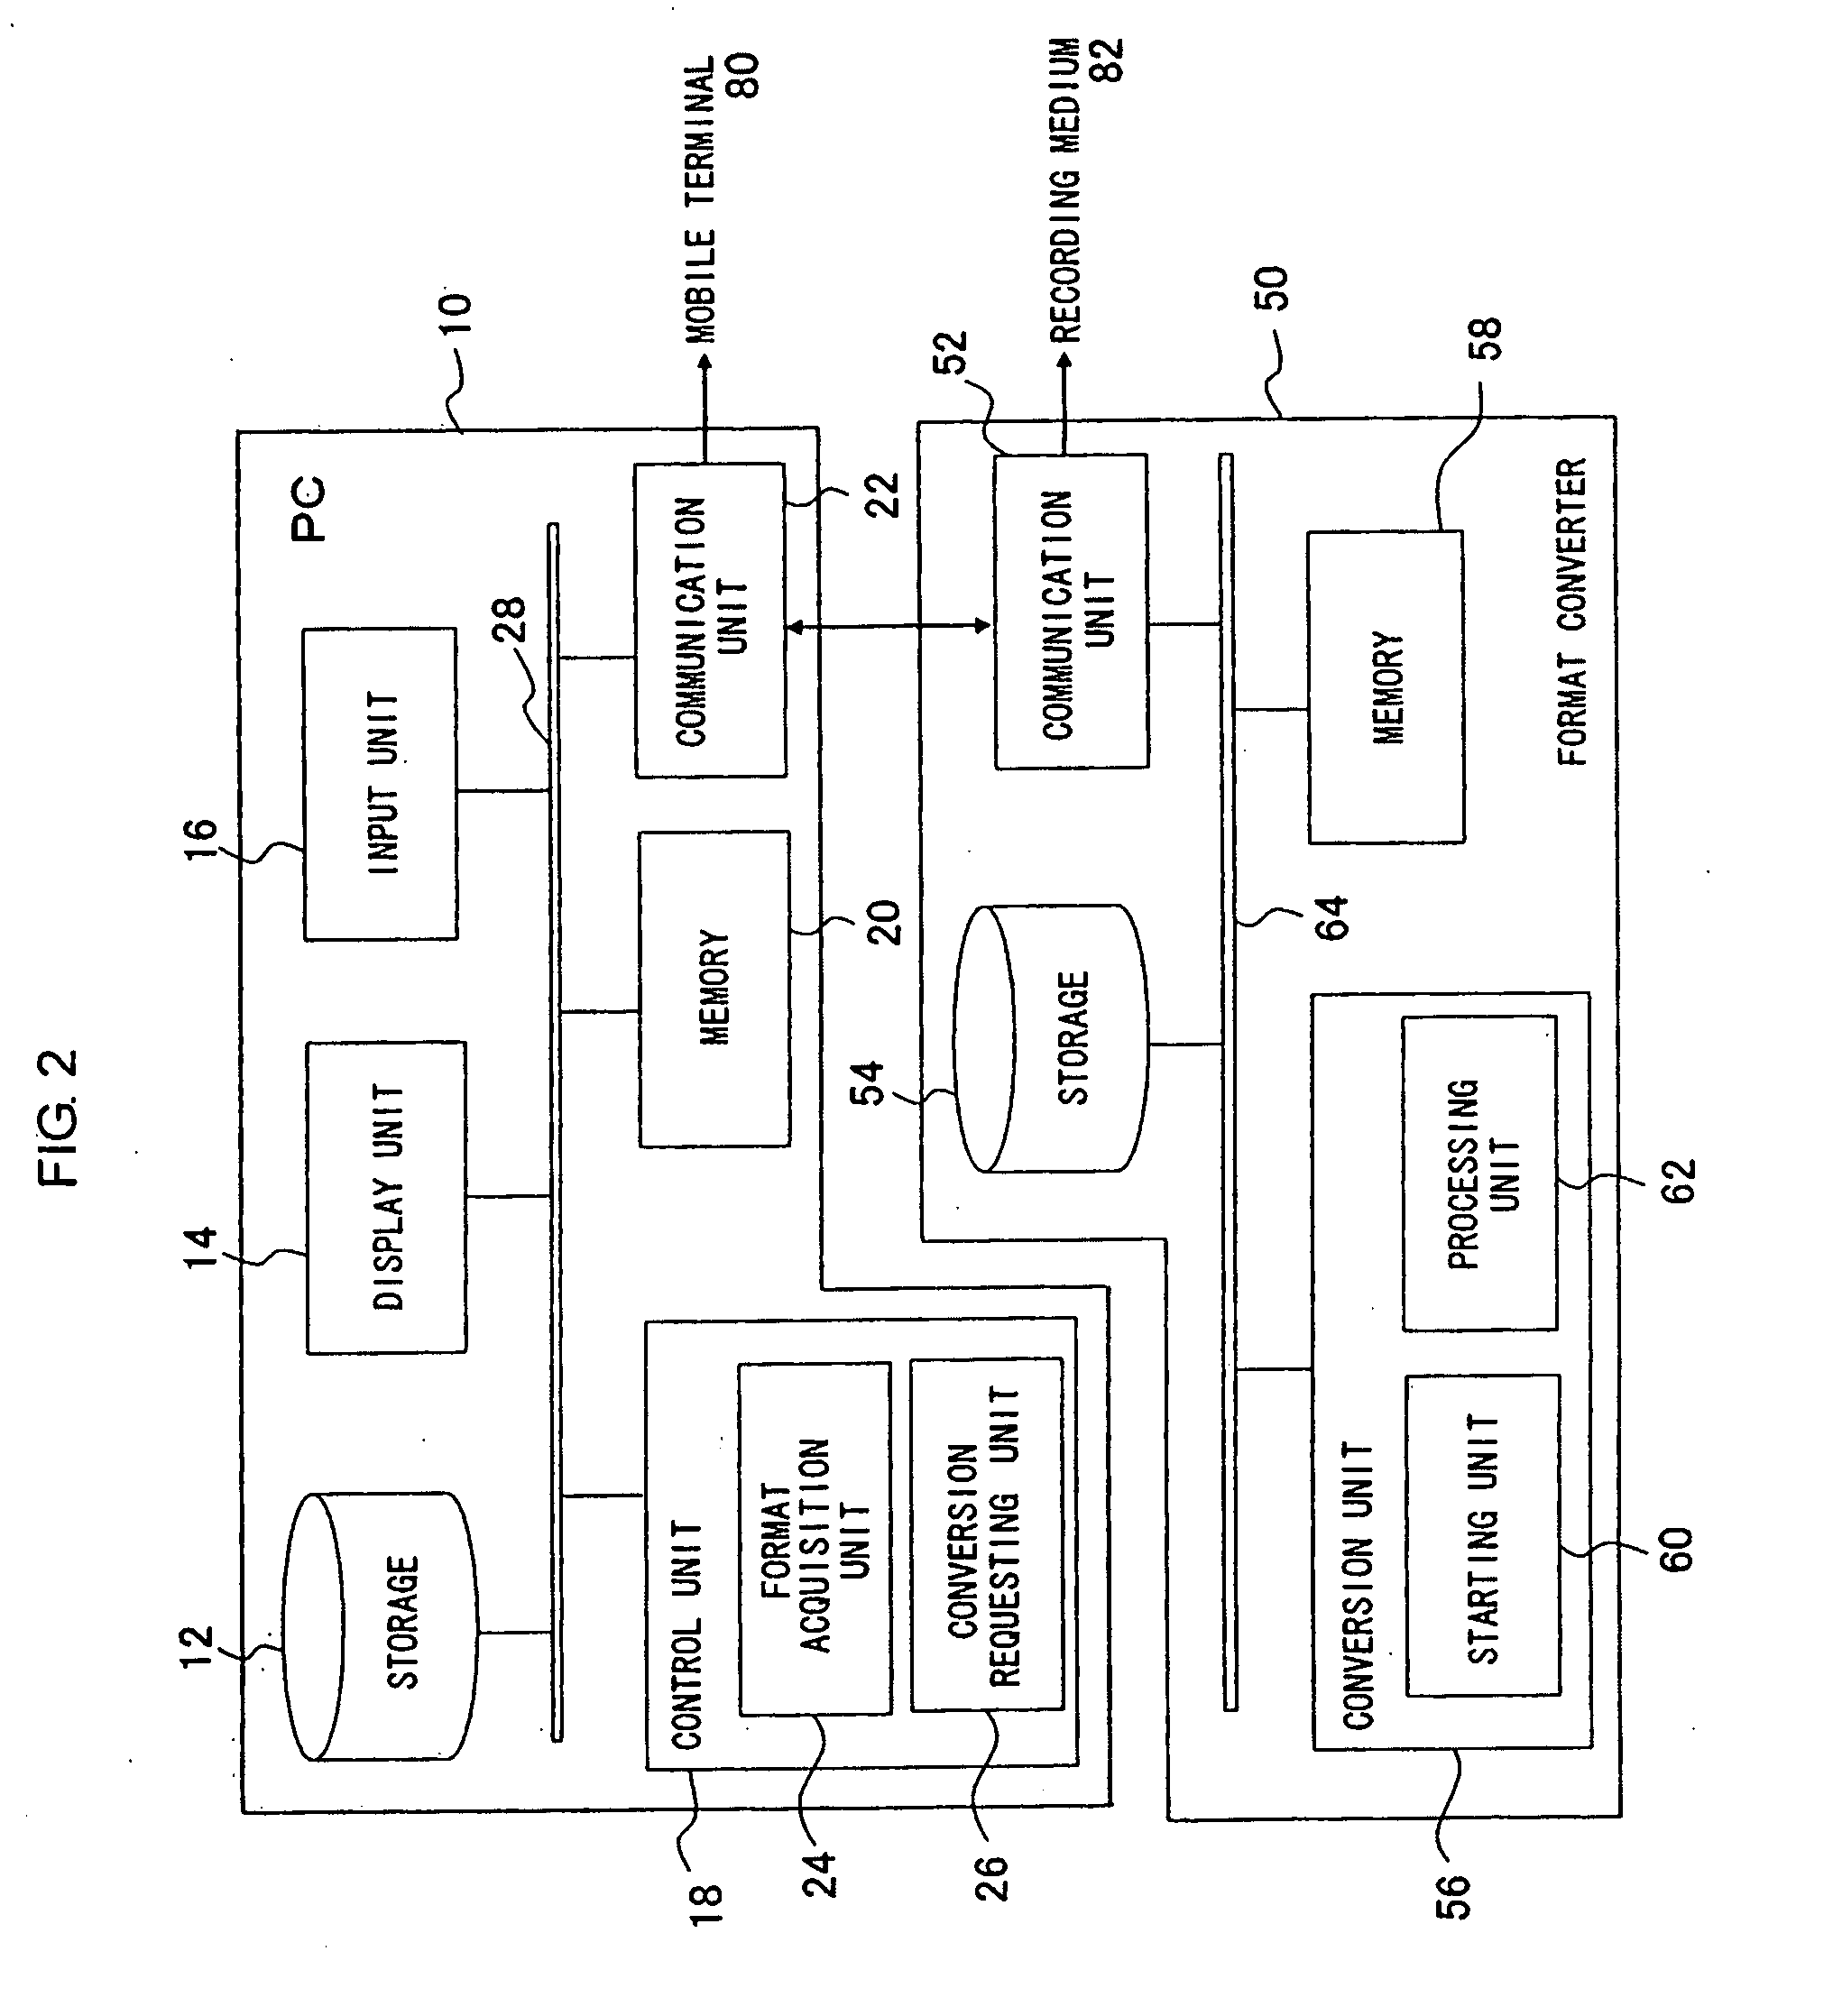 Data transfer system capable of converting file formats